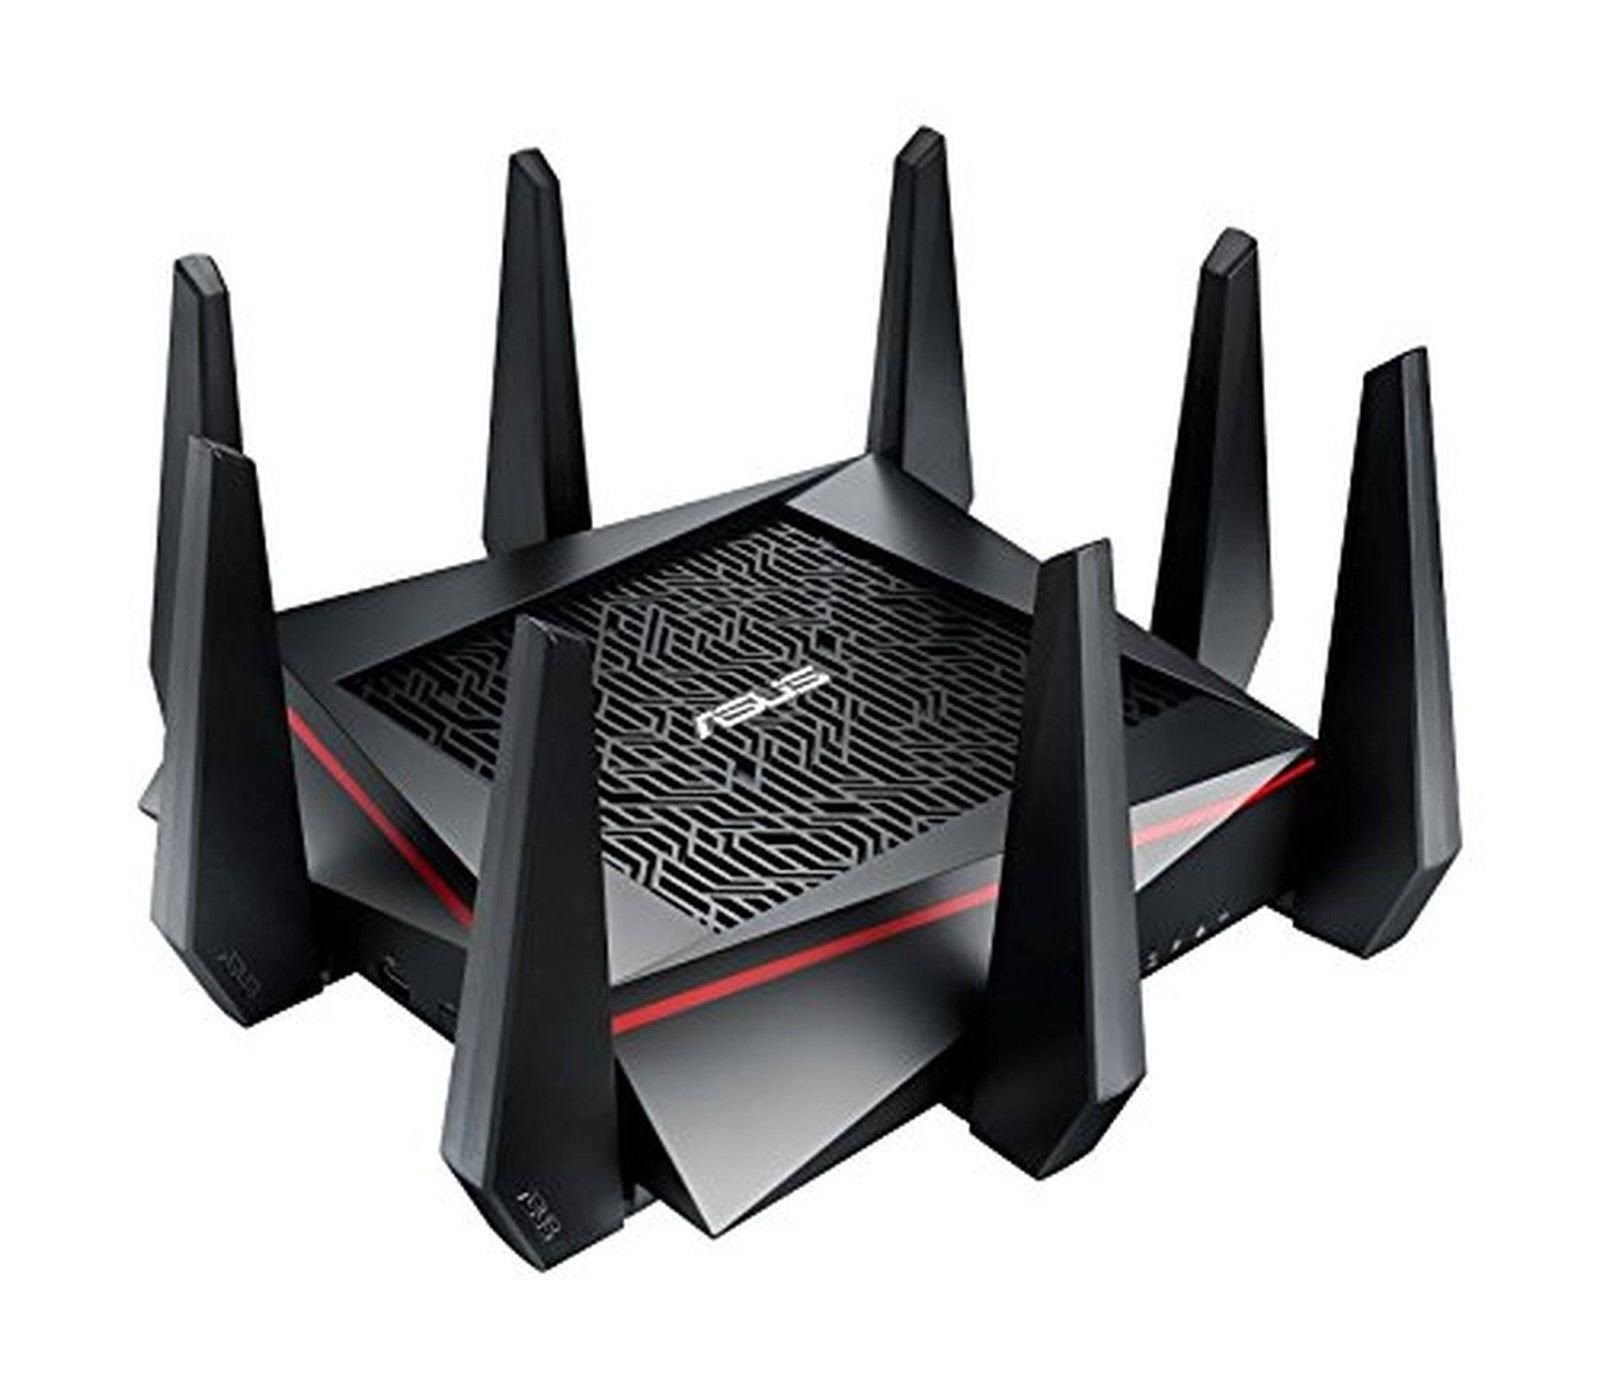 ASUS RT-AC5300 Gaming Router